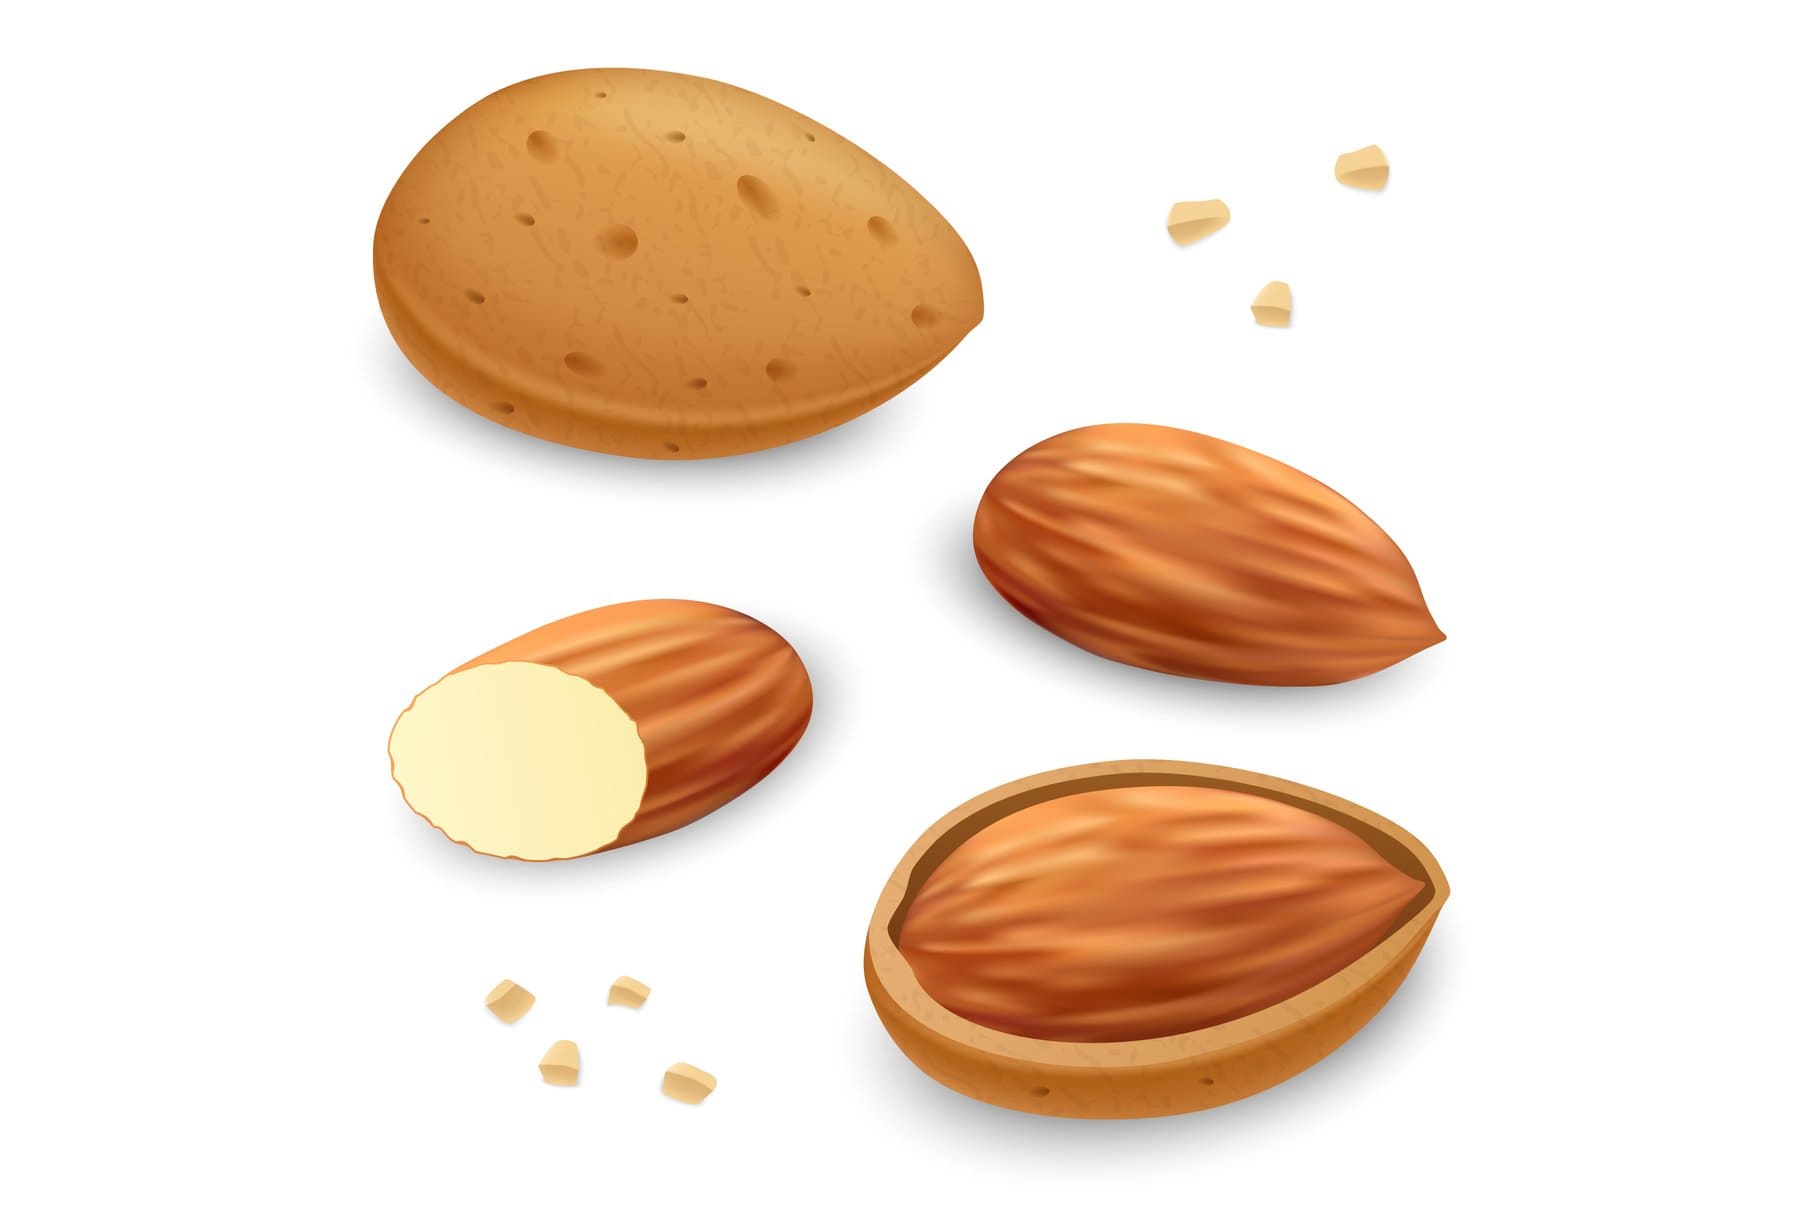 Realistic image of an almond.